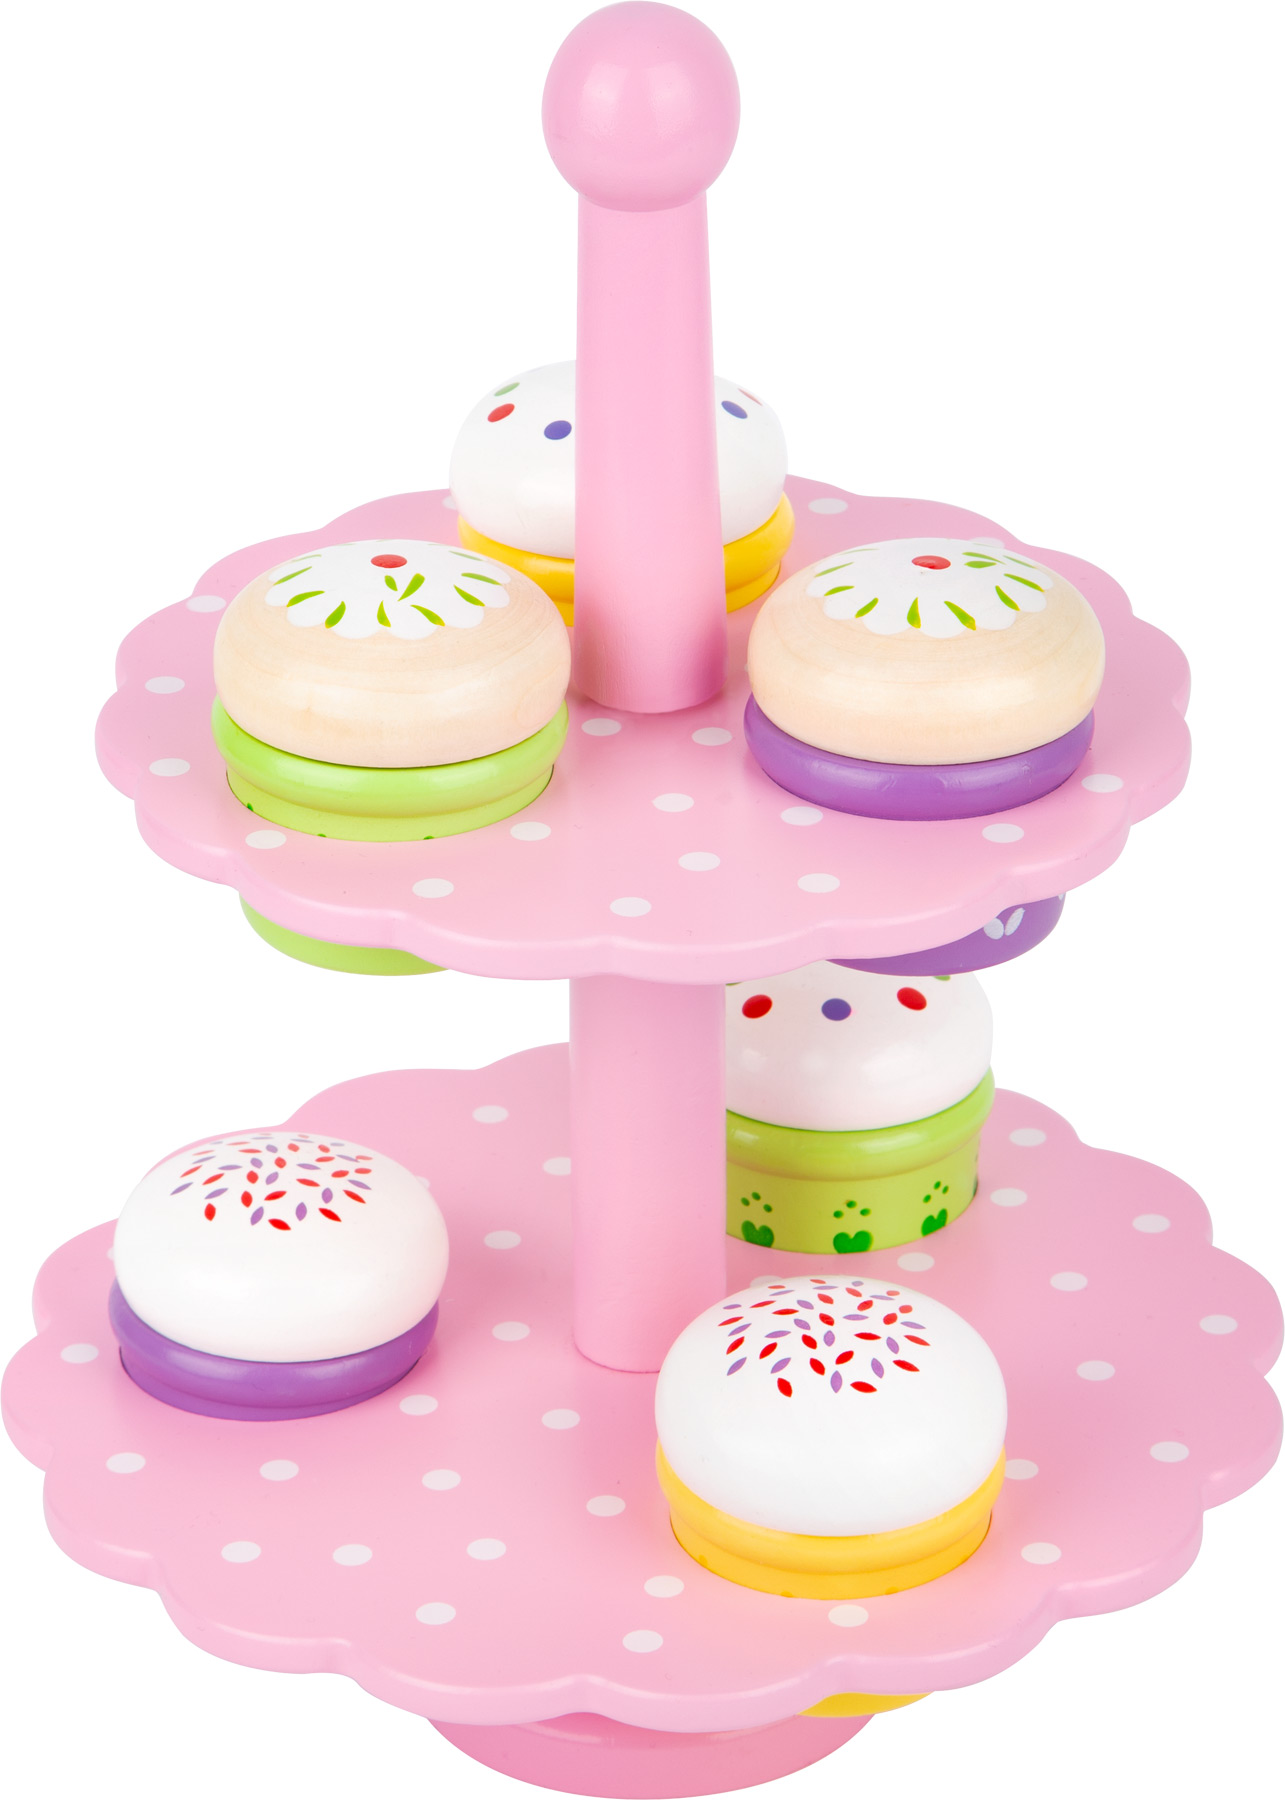 small foot company - Etagere für Muffins und Cupcakes